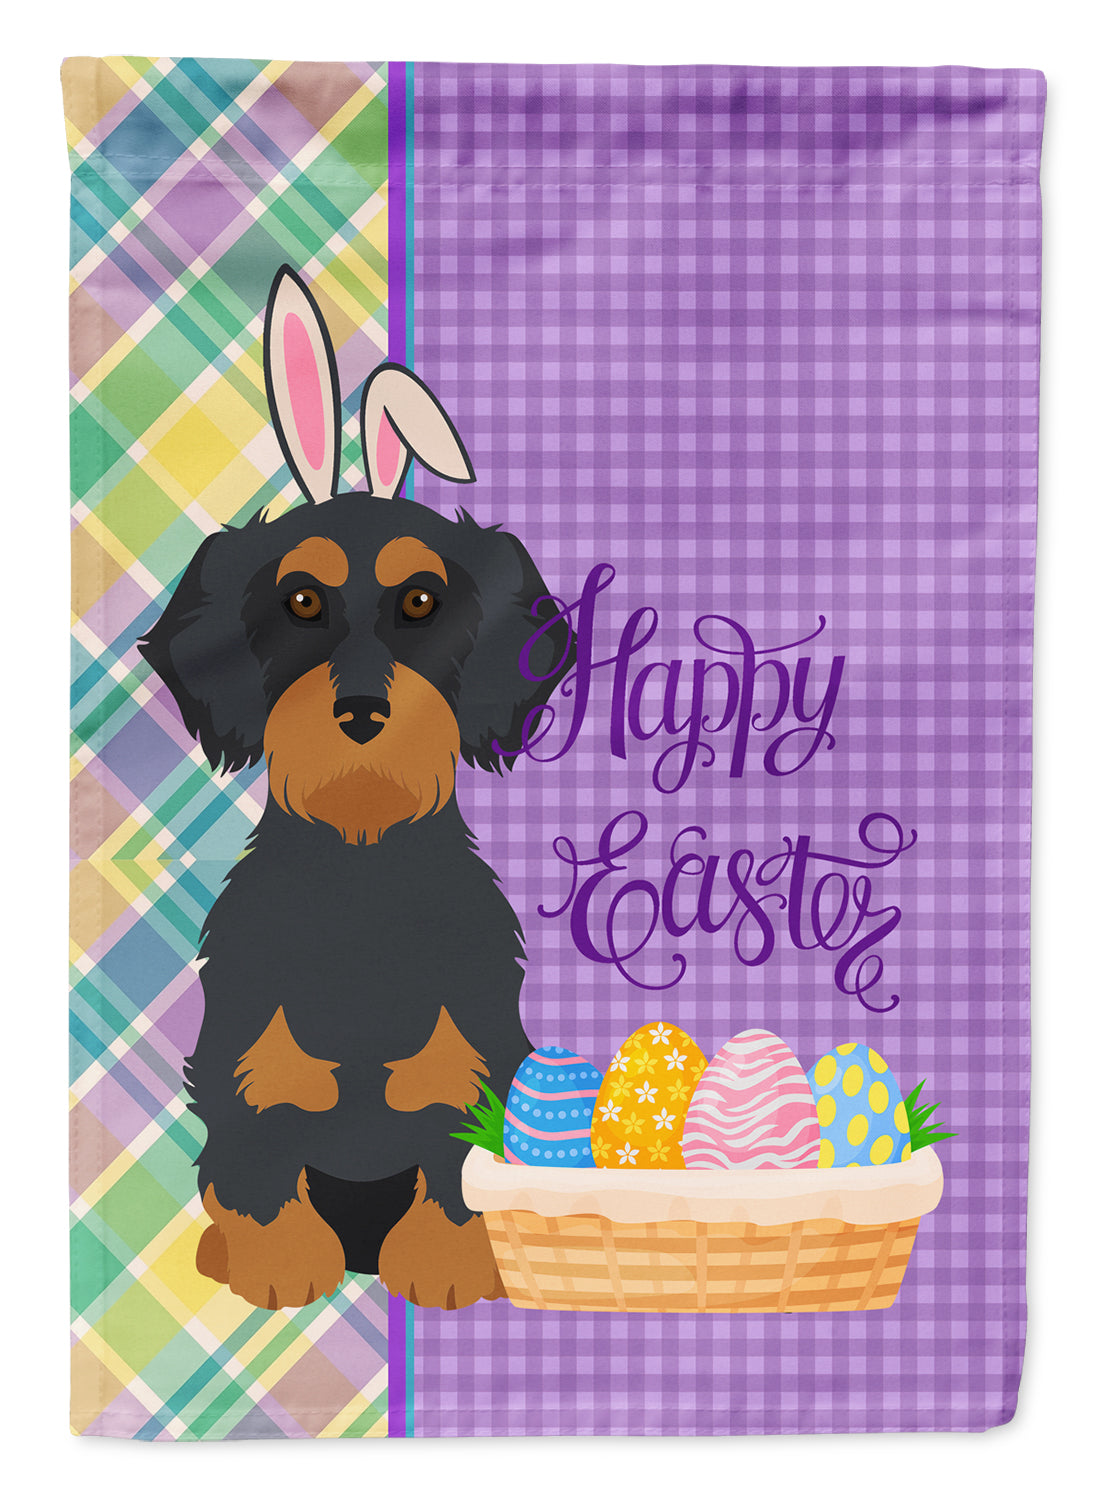 Wirehair Black and Tan Dachshund Easter Flag Garden Size